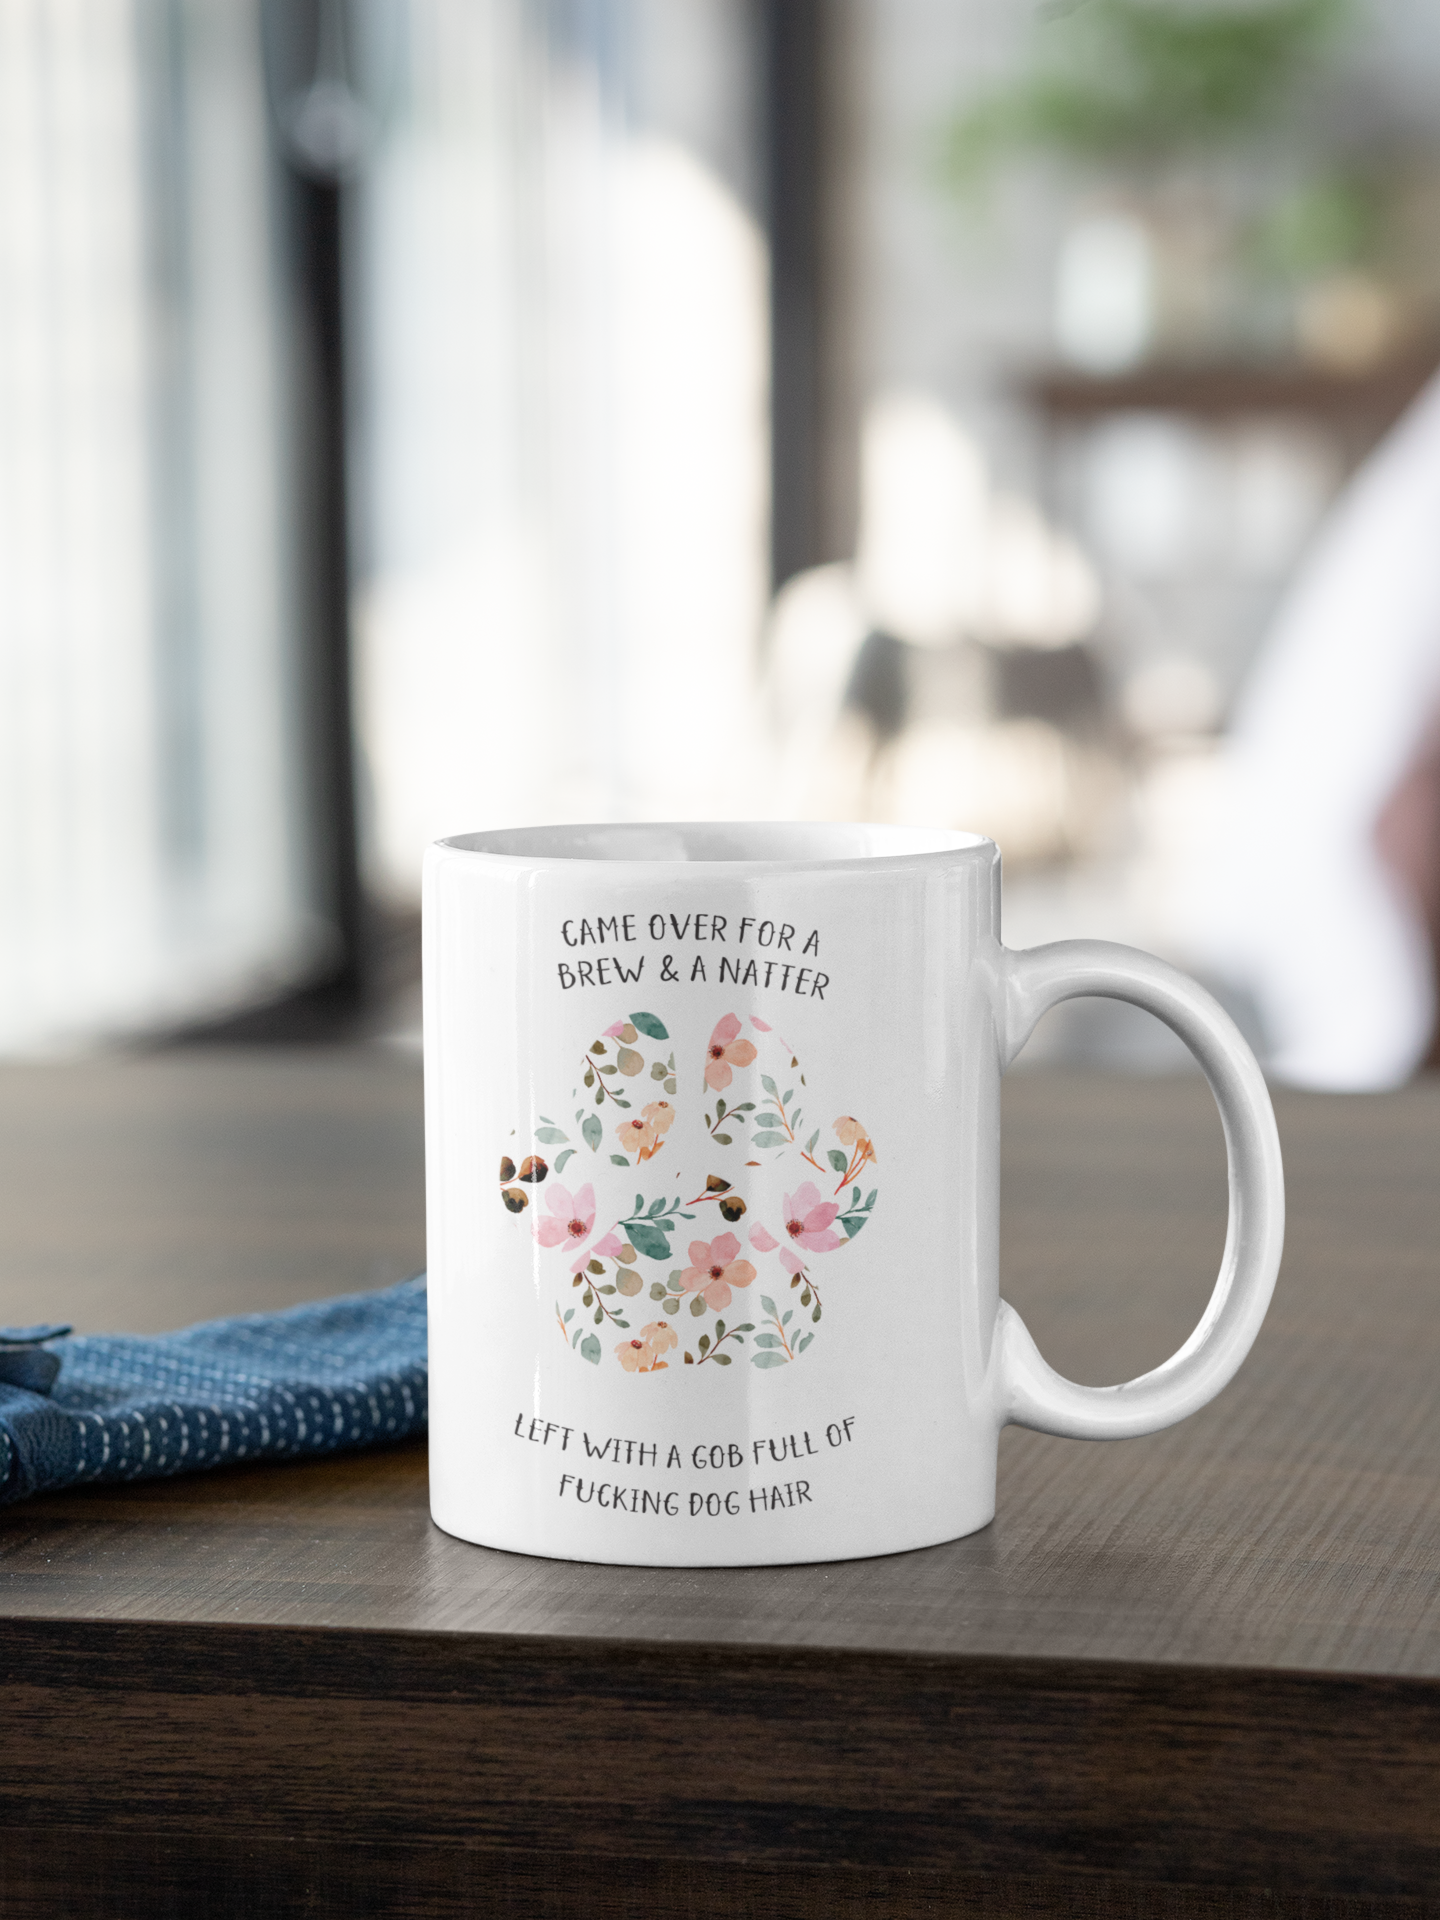 White ceramic mug with a cute colourful floral dog paw print design. To the top of the print it reads 'came over for a brew & a natter' then to the bottom is says 'left with a gob full of fucking dog hair'. Printed in black ink.